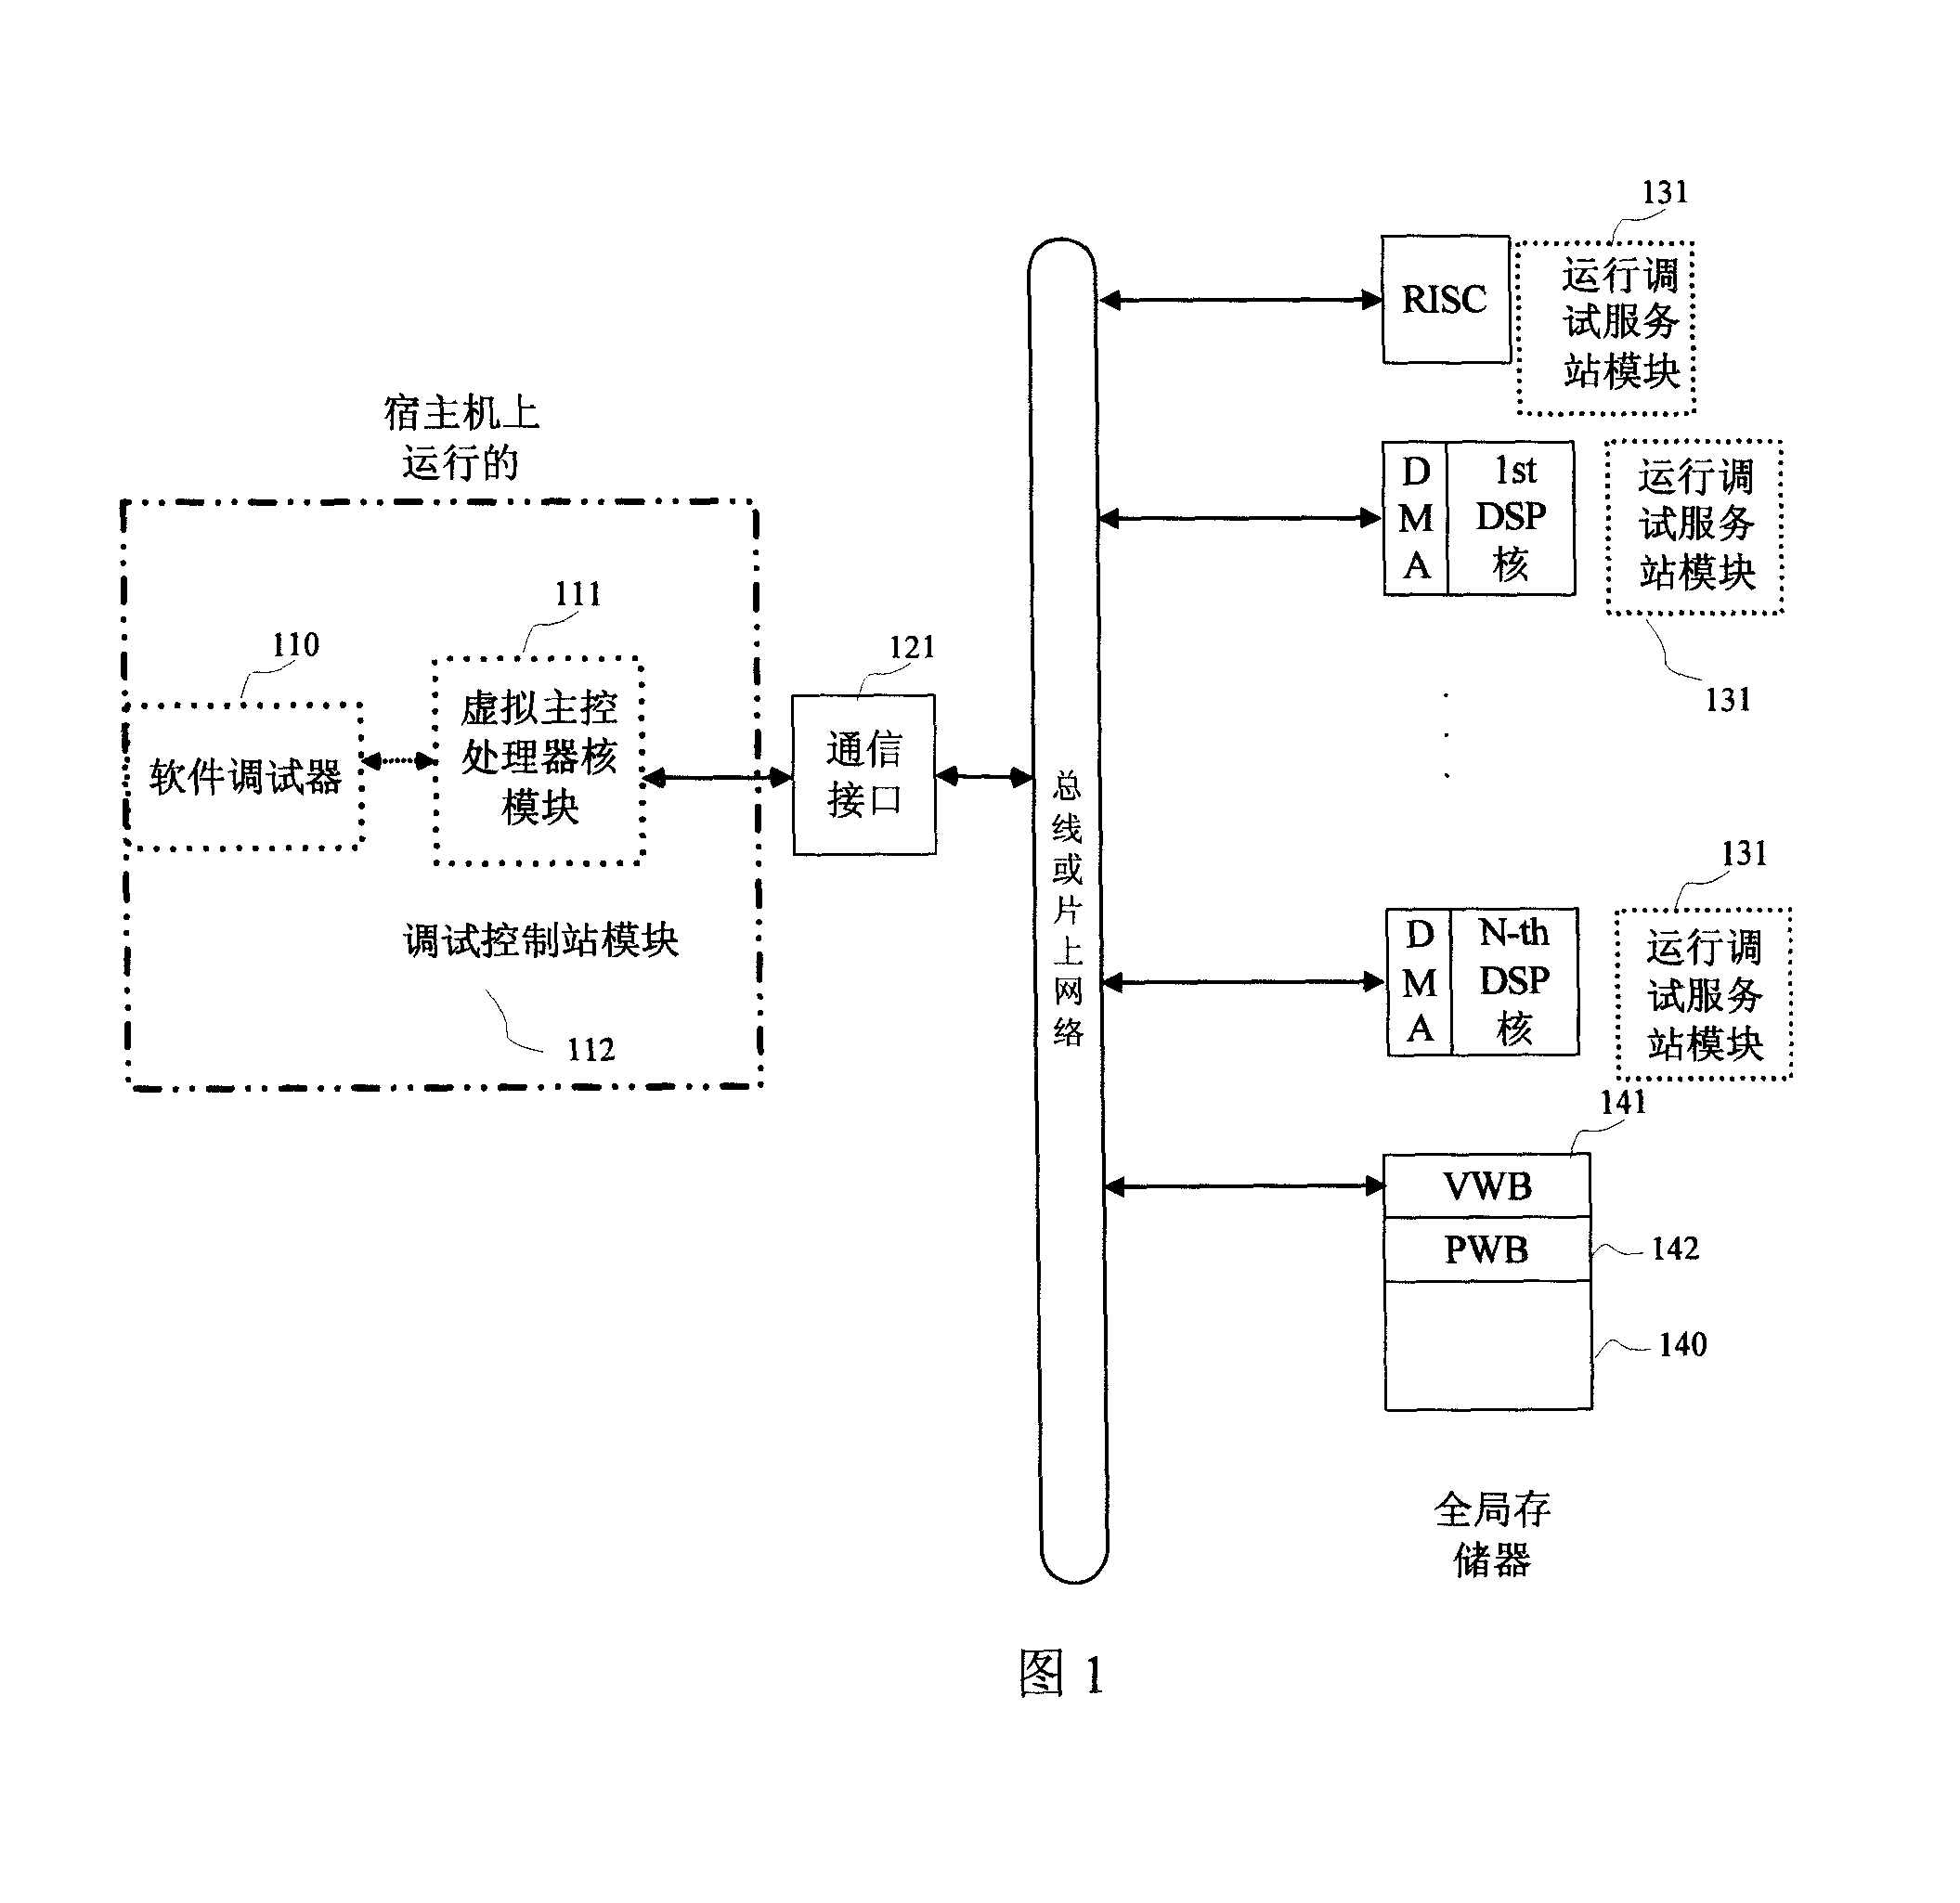 Debug method suitable for multi-processor core system chip